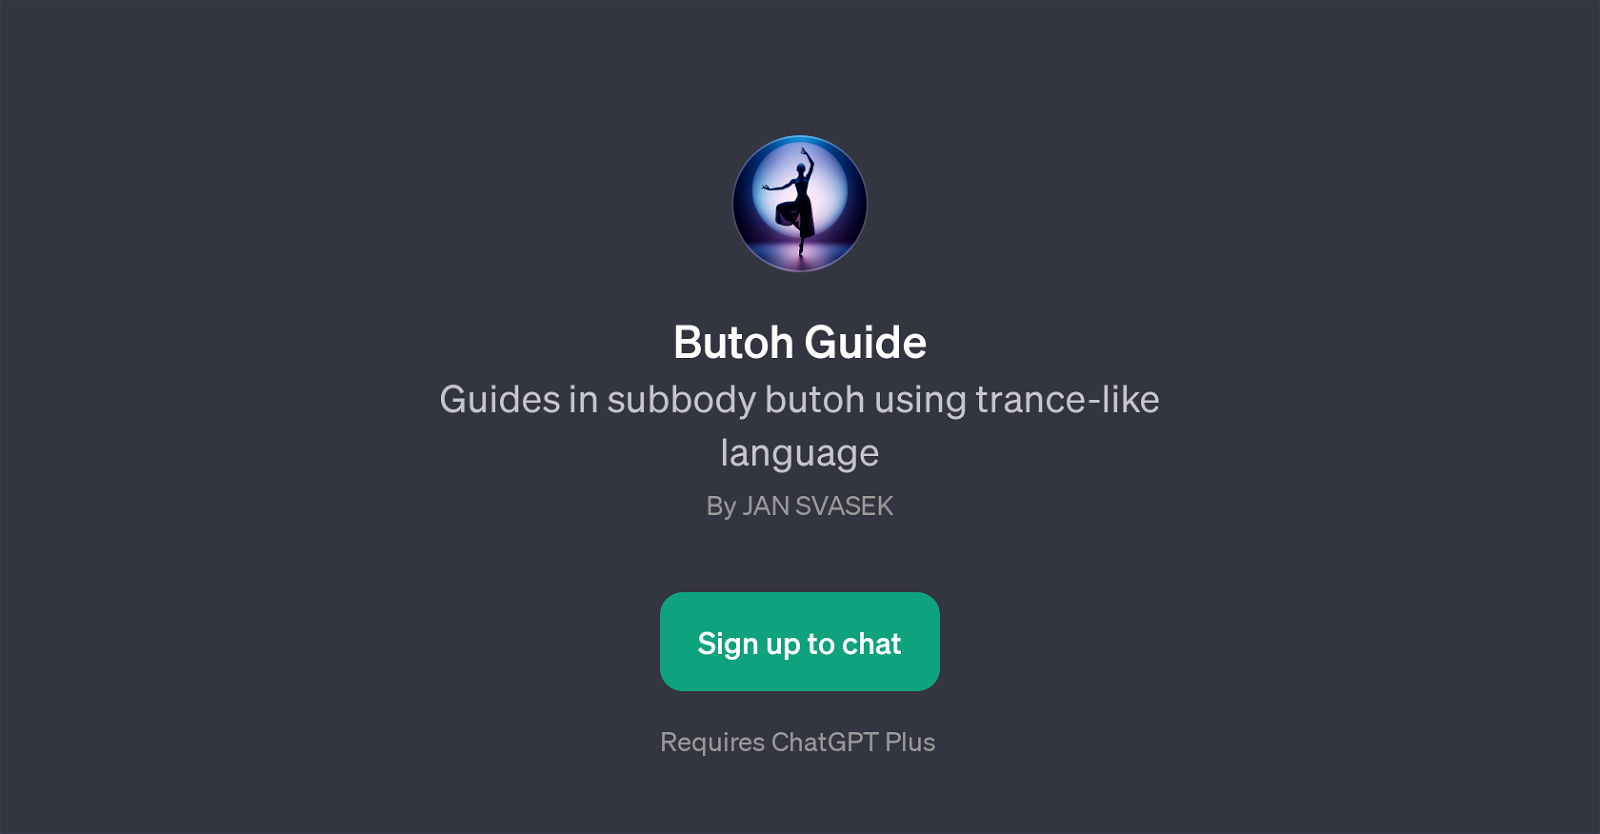 Butoh Guide website